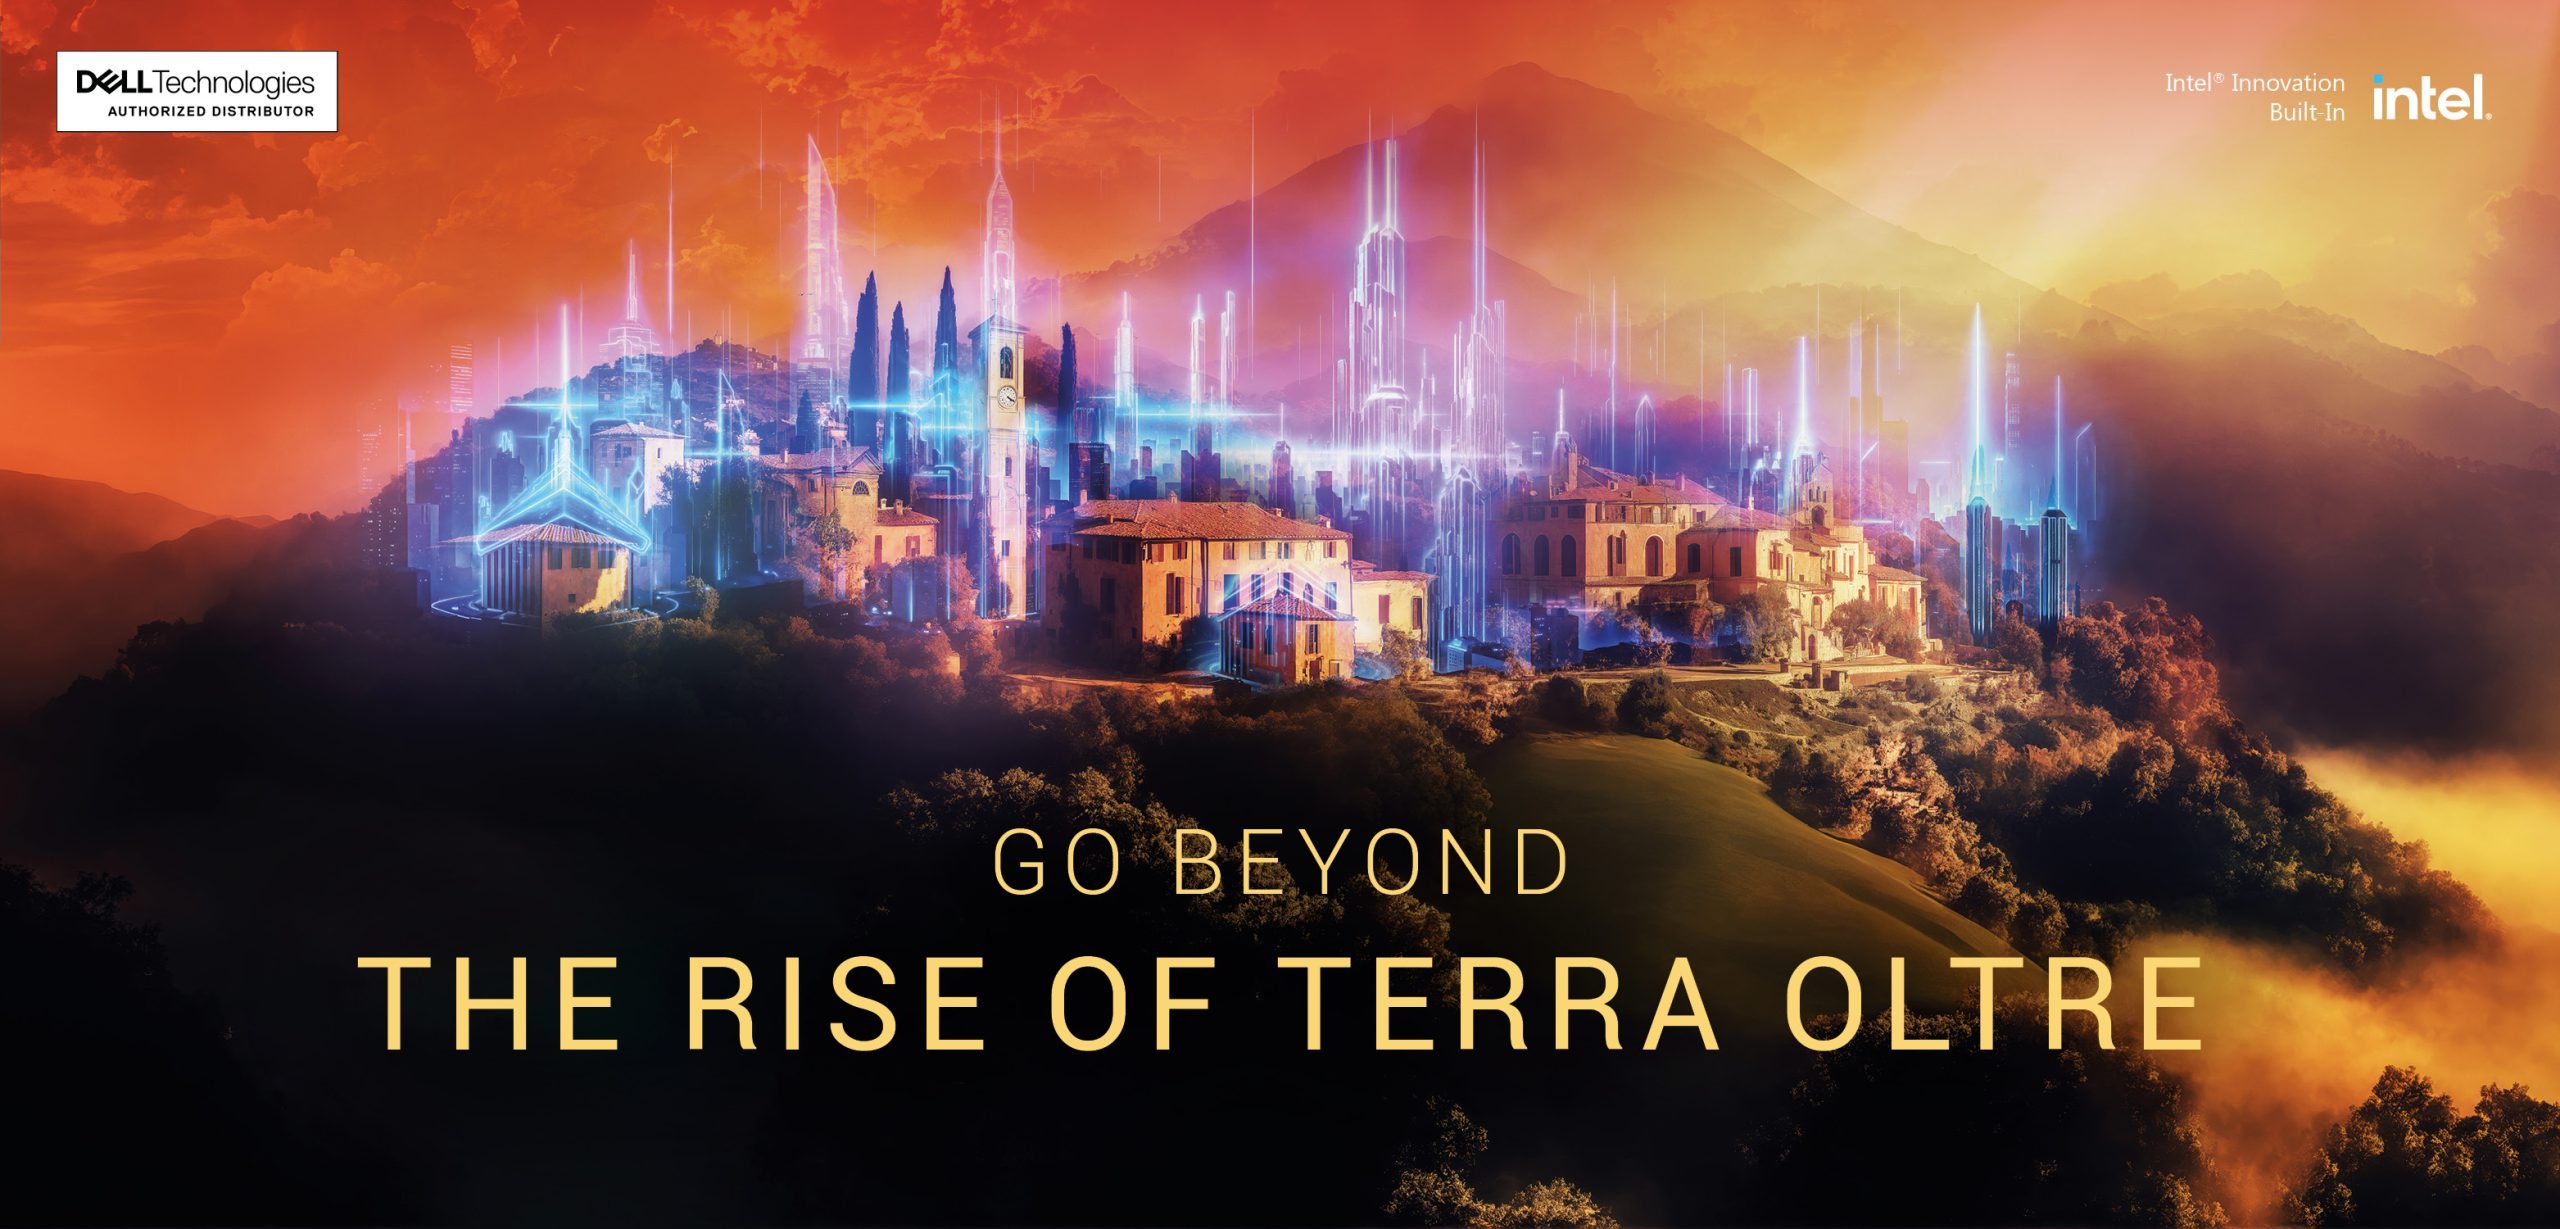 GO BEYOND - THE RISE OF TERRA OLTRE